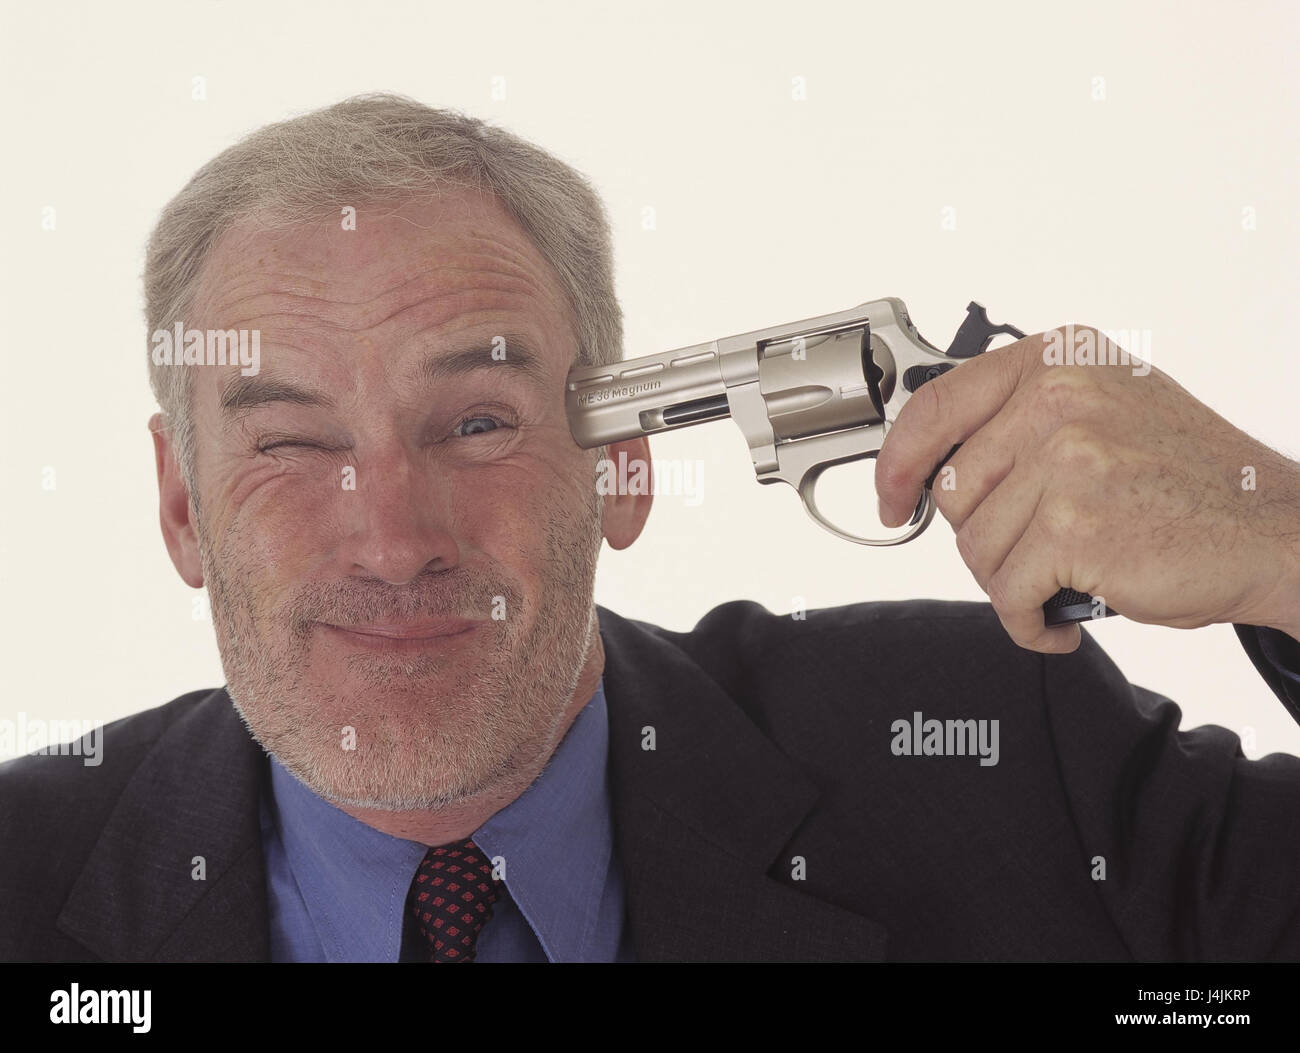 Man, revolver, hold, temple, facial play, portrait manager, businessman, suicide, desperately, helplessly, disappoints, suicide, suicide, Frei-deadly, destiny, ailment printing, hopelessness, hopelessly, depression, depressively, desperation action, bankruptcy, tuning, negatively, feeling, charge, desperation Stock Photo